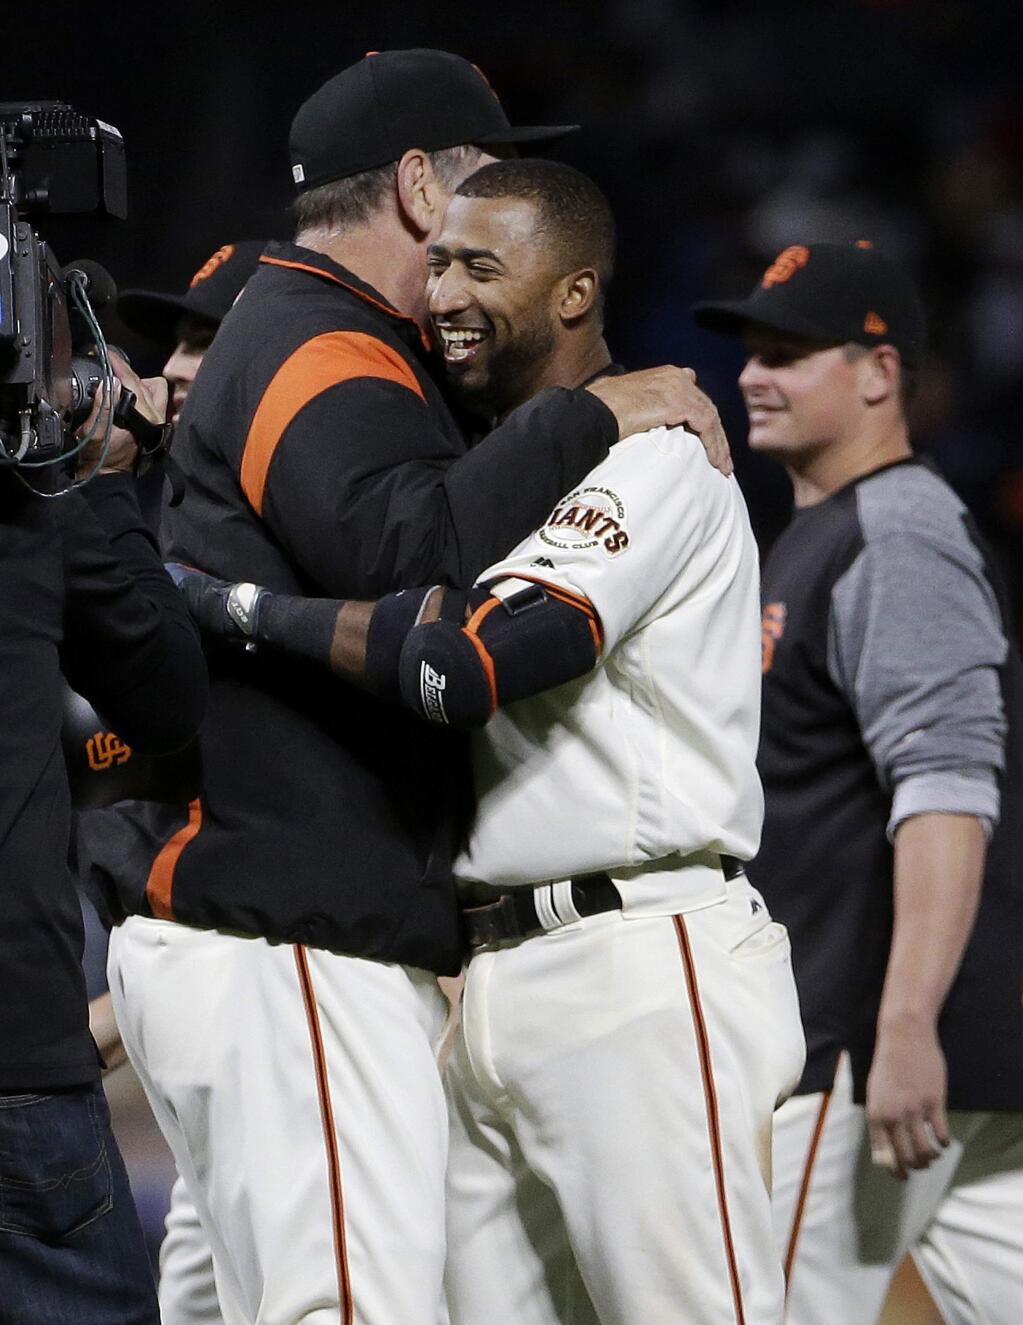 San Francisco Giants' Eduardo Nunez, front right, hugs manager Bruce Bochy after singling to score Kelby Tomlinson for the winning run during the 10th inning of a baseball game against the Cleveland Indians in San Francisco, Tuesday, July 18, 2017. The Giants won 2-1. (AP Photo/Jeff Chiu)